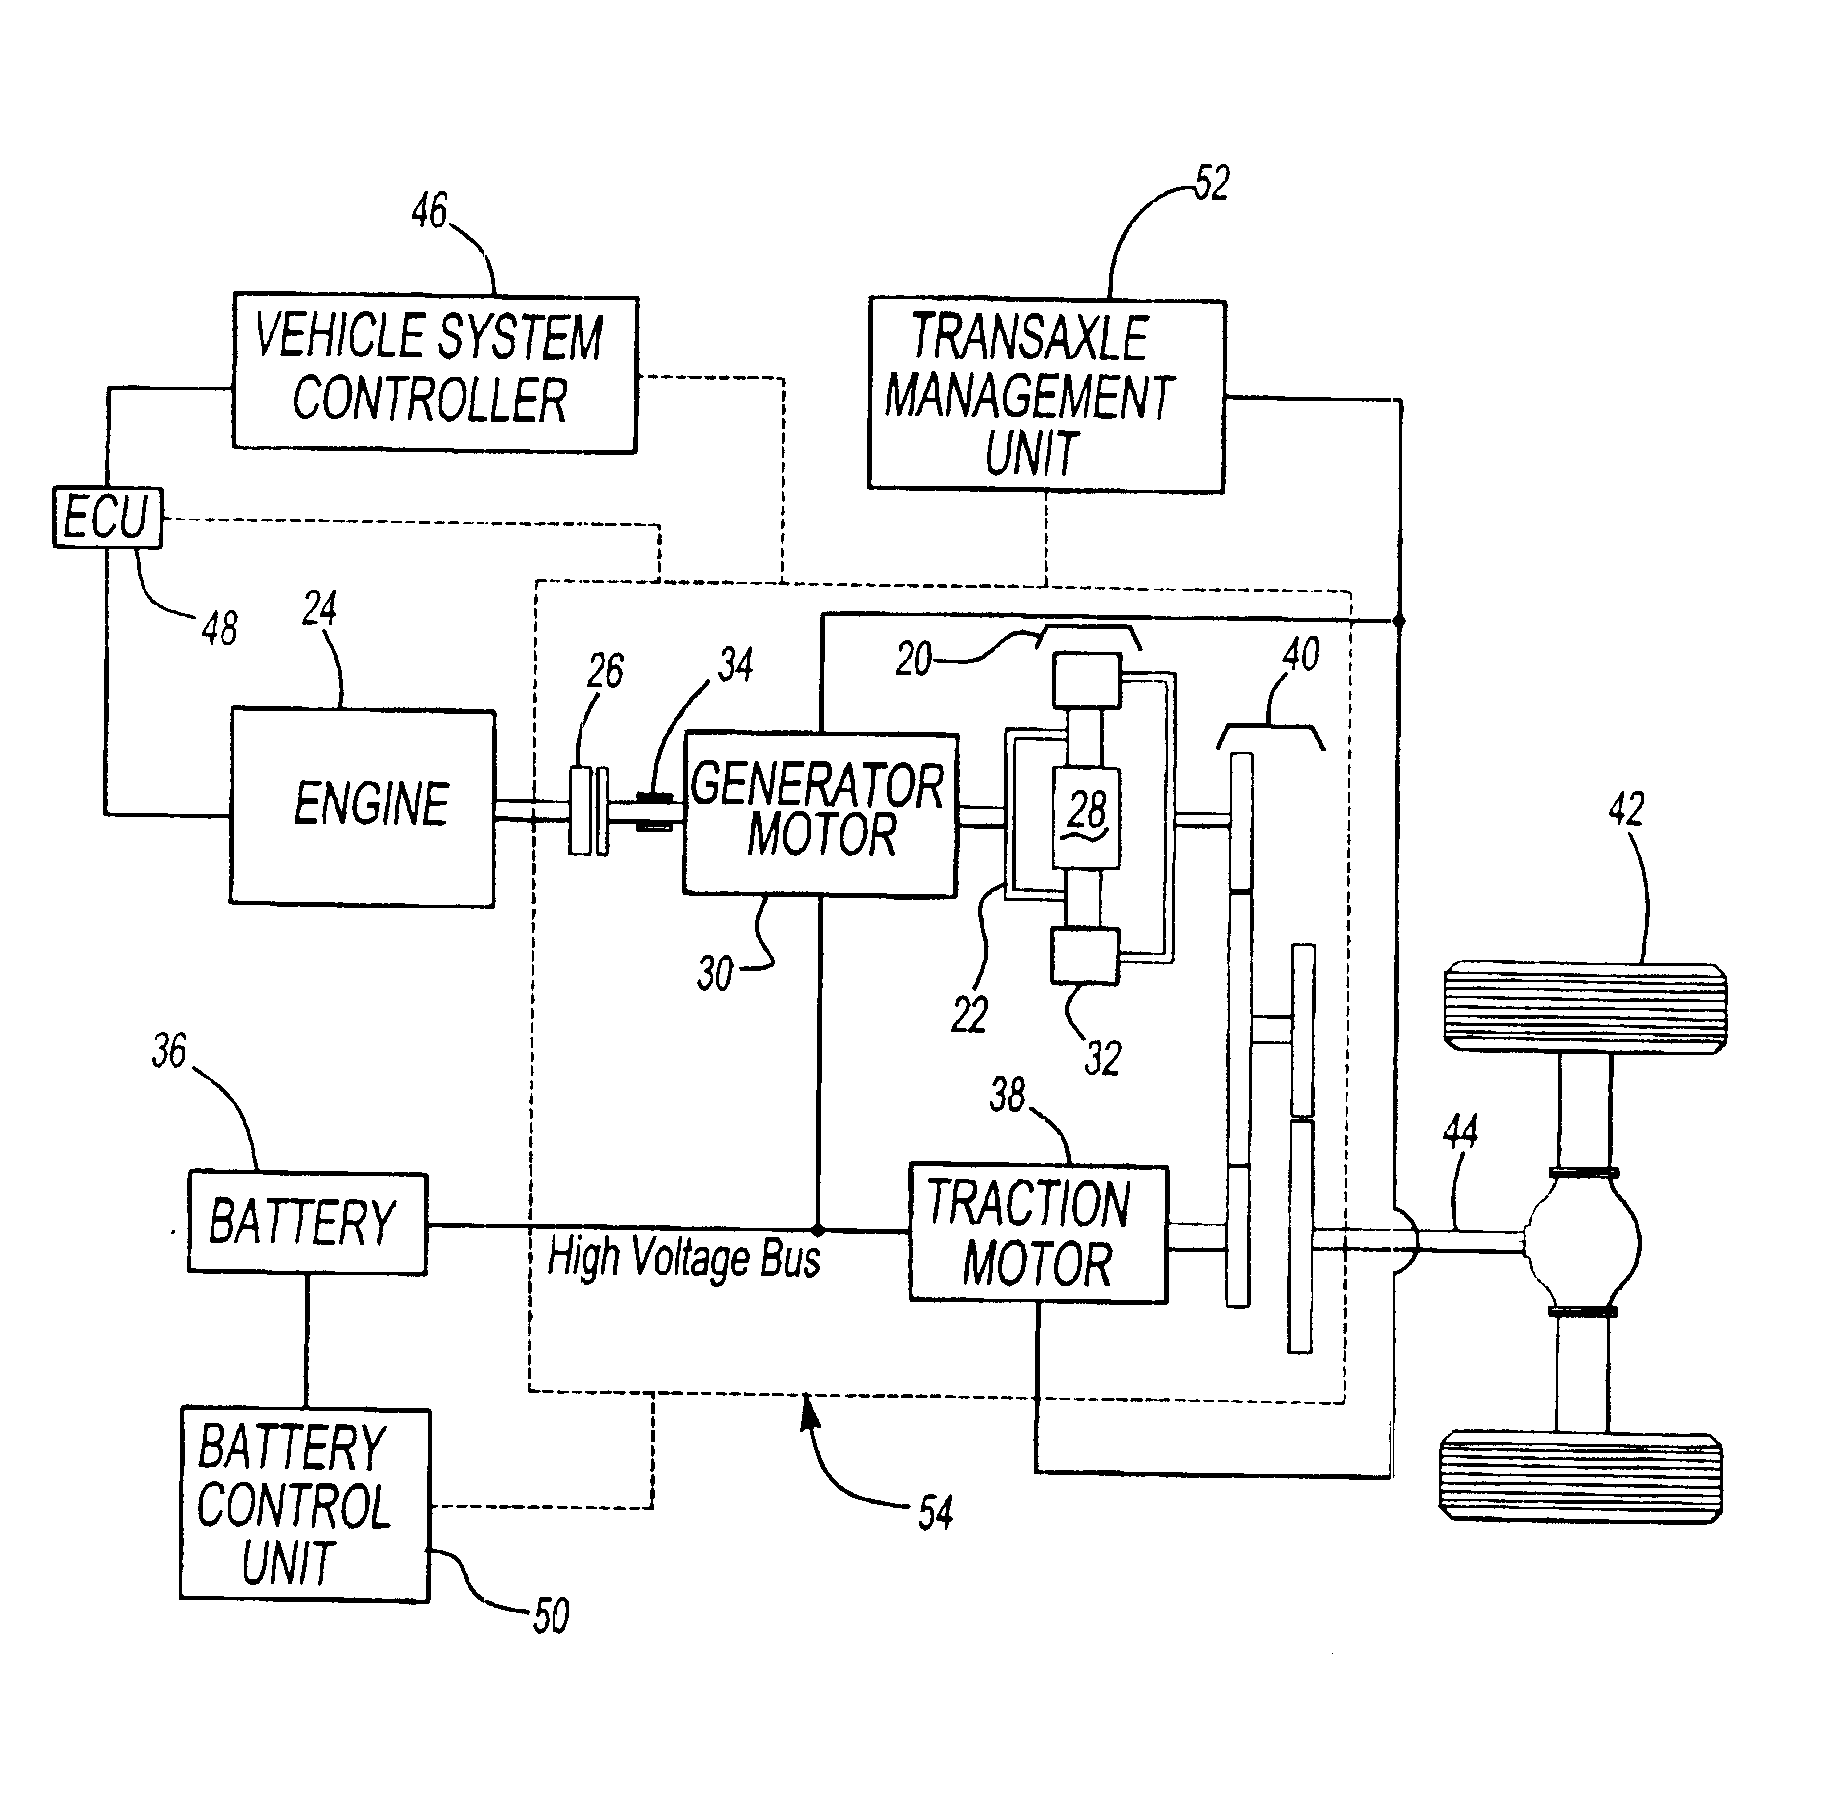 Oil pressure diagnostic strategy for a hybrid electric vehicle